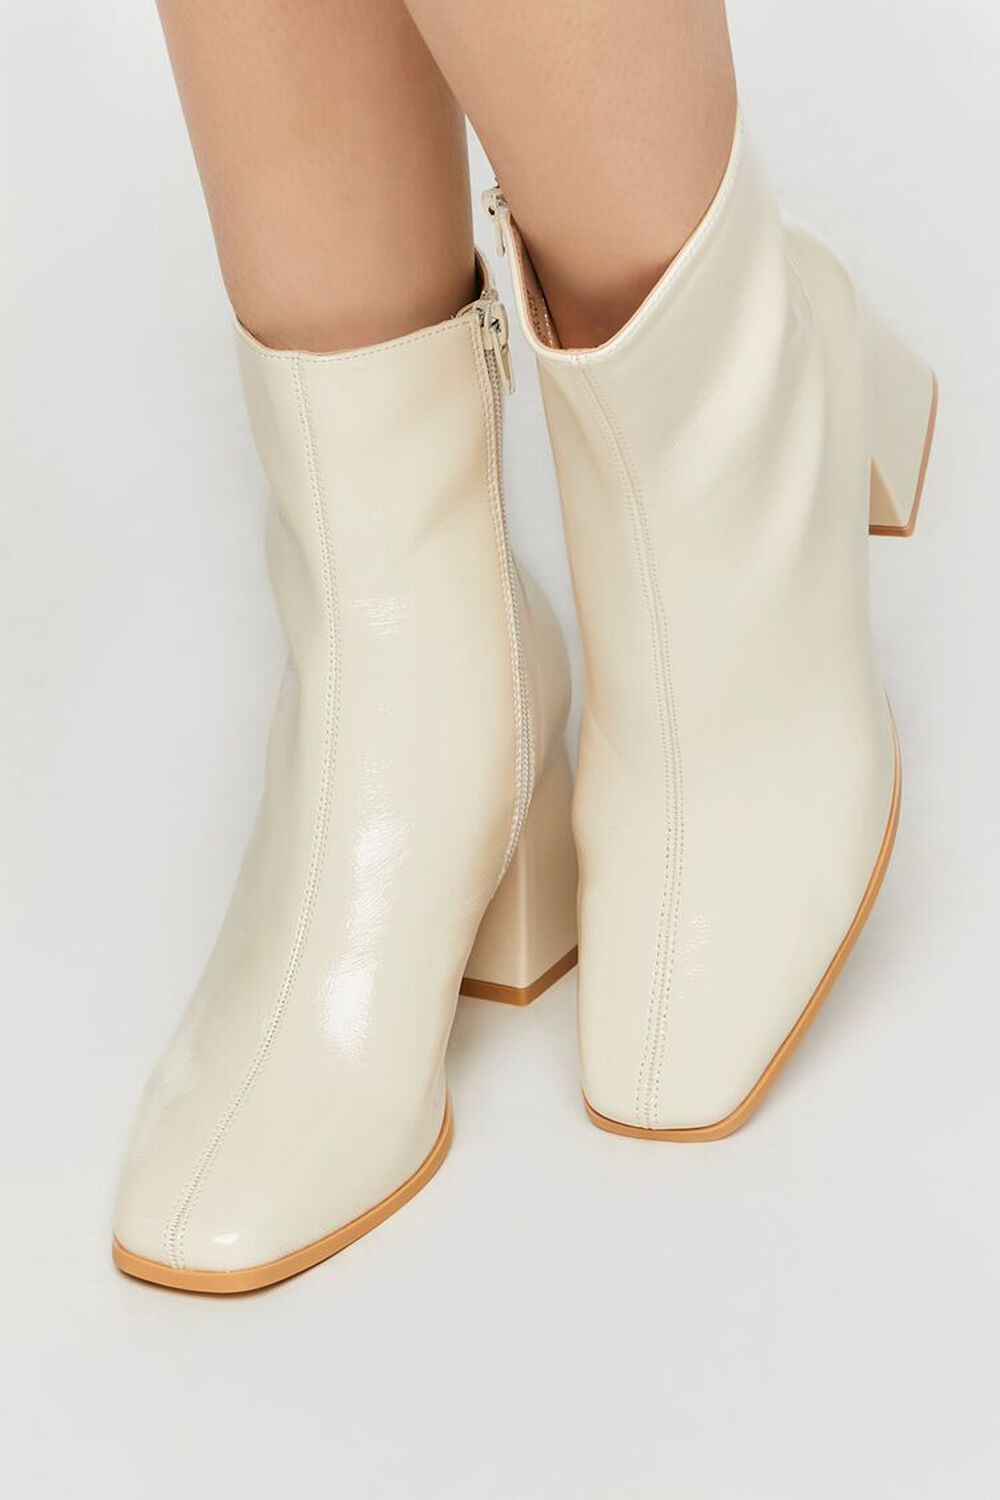 CREAM Faux Patent Leather Ankle Booties, image 1